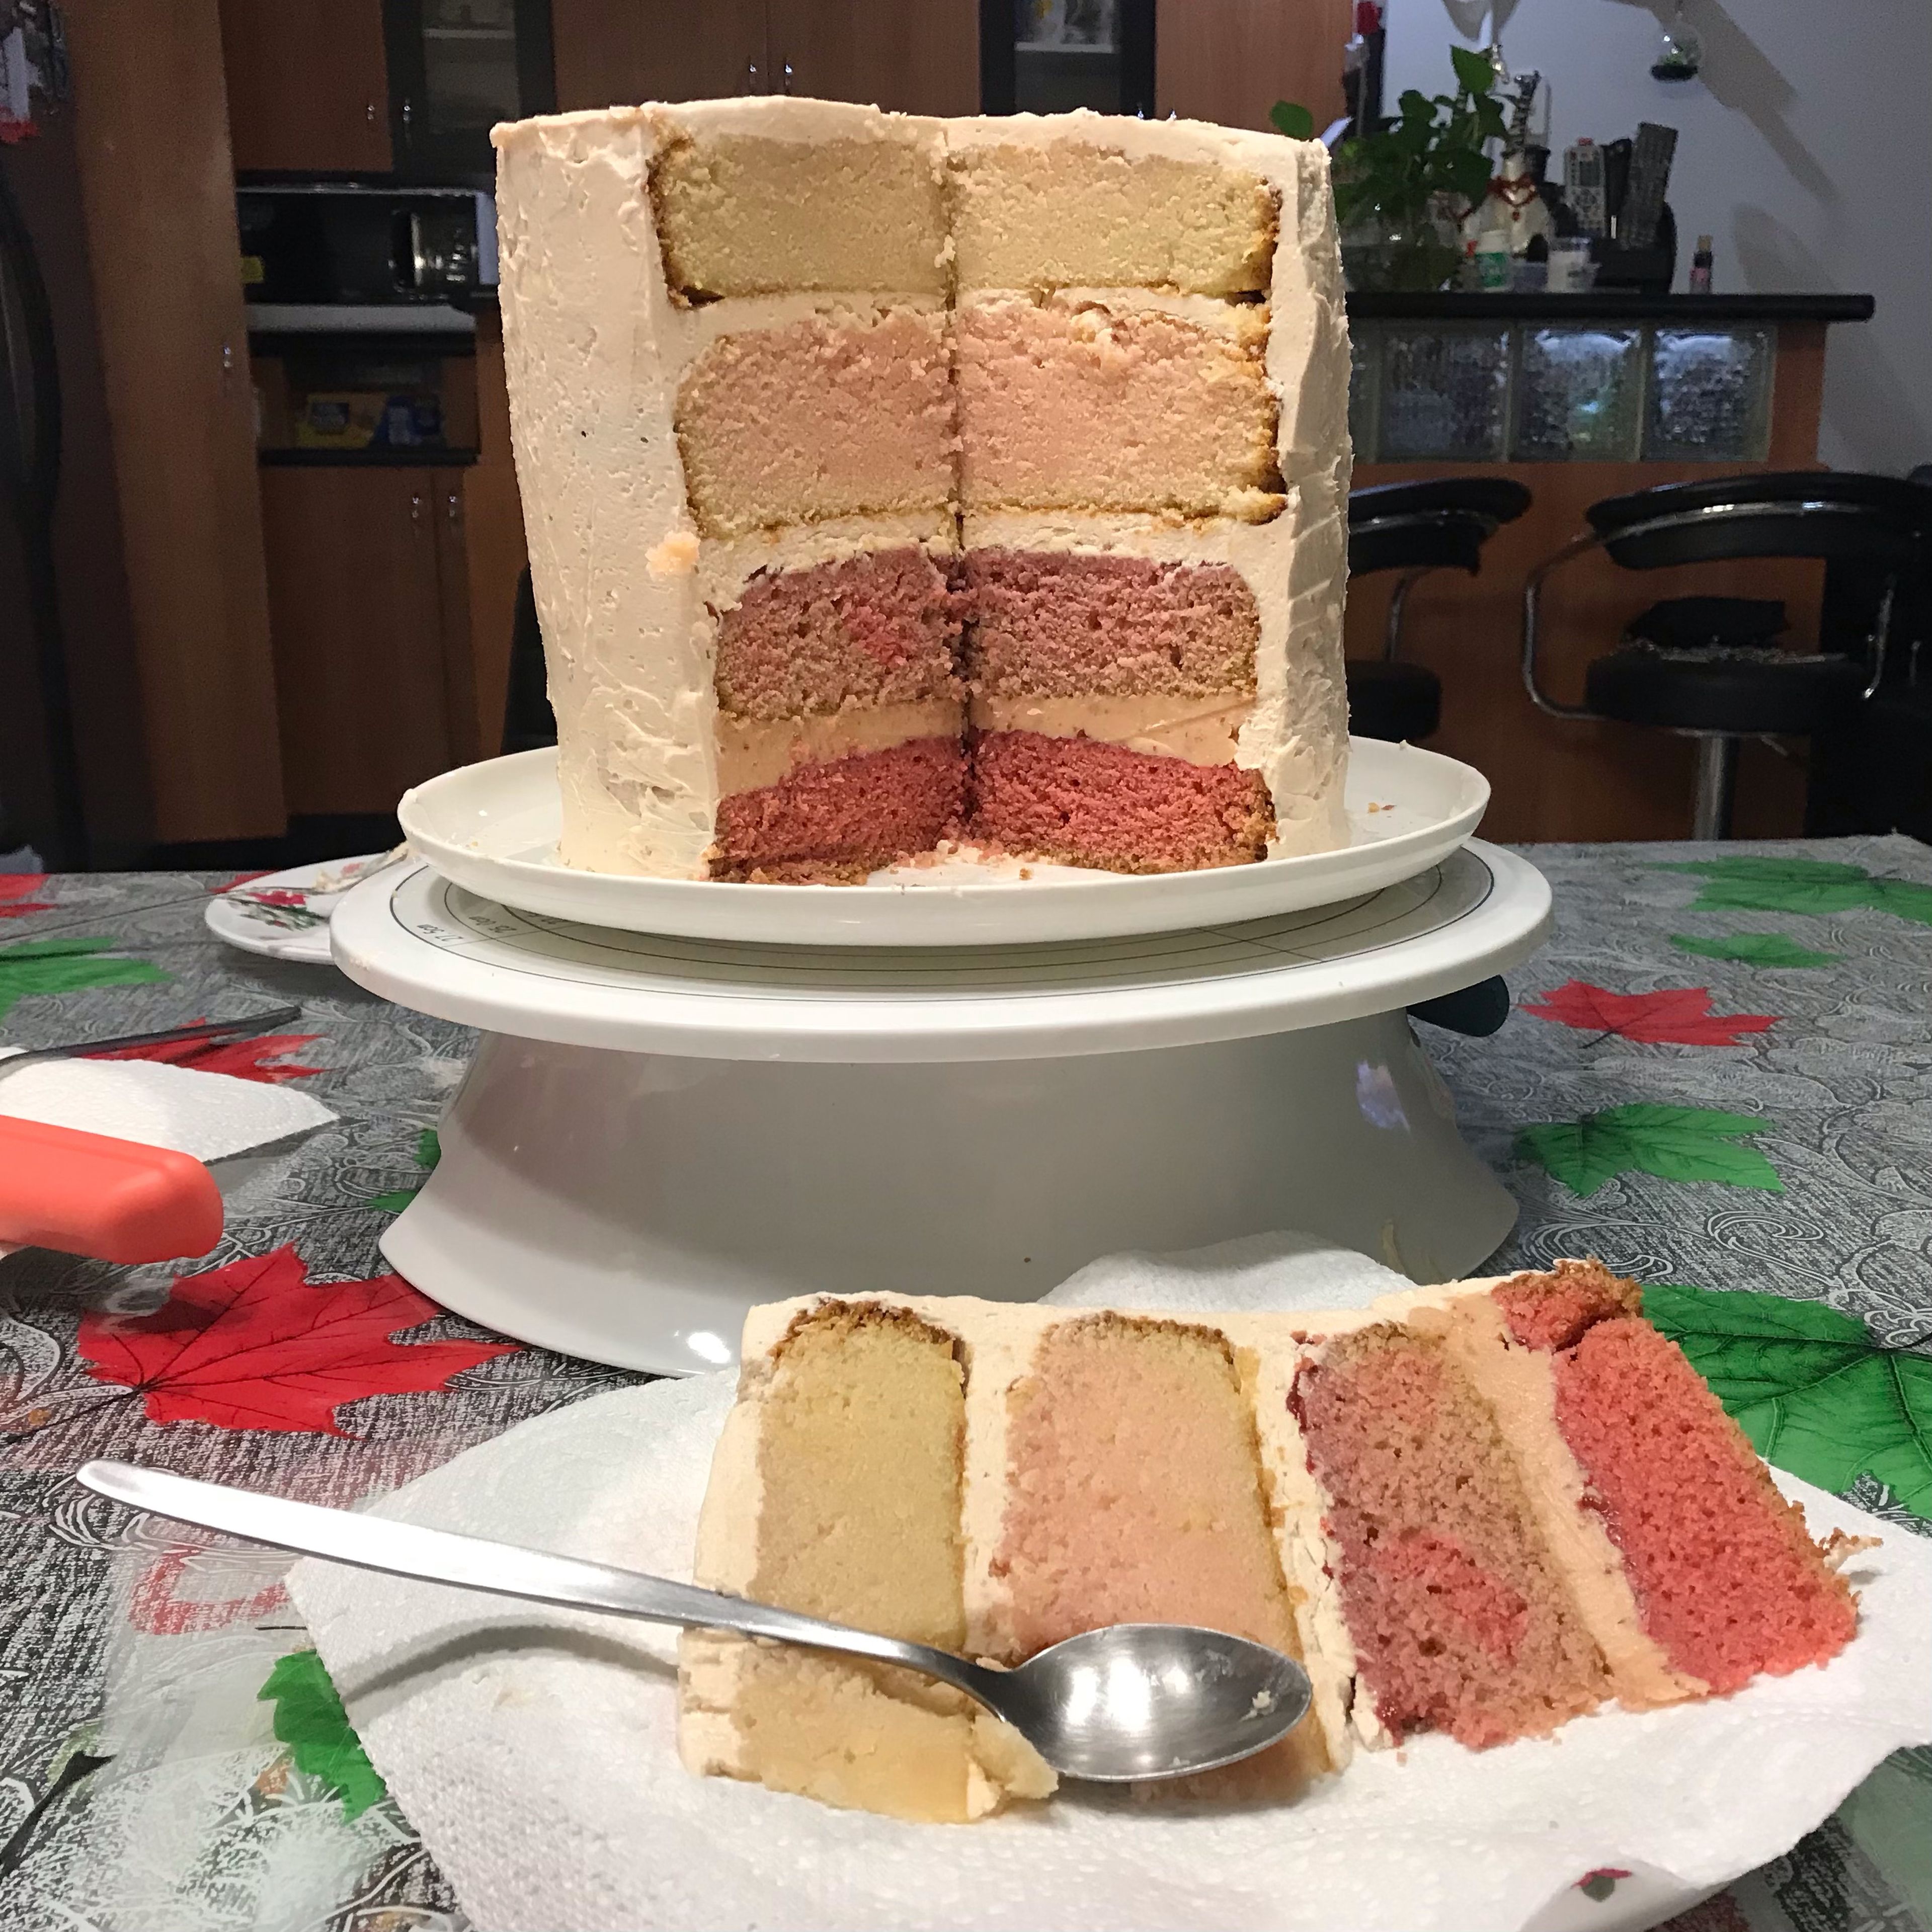 Use an icing scraper or bench scraper to smooth edges, wiping clean in between each use. Decorate as desired. (Here is a picture from the second time I’ve made the cake.)